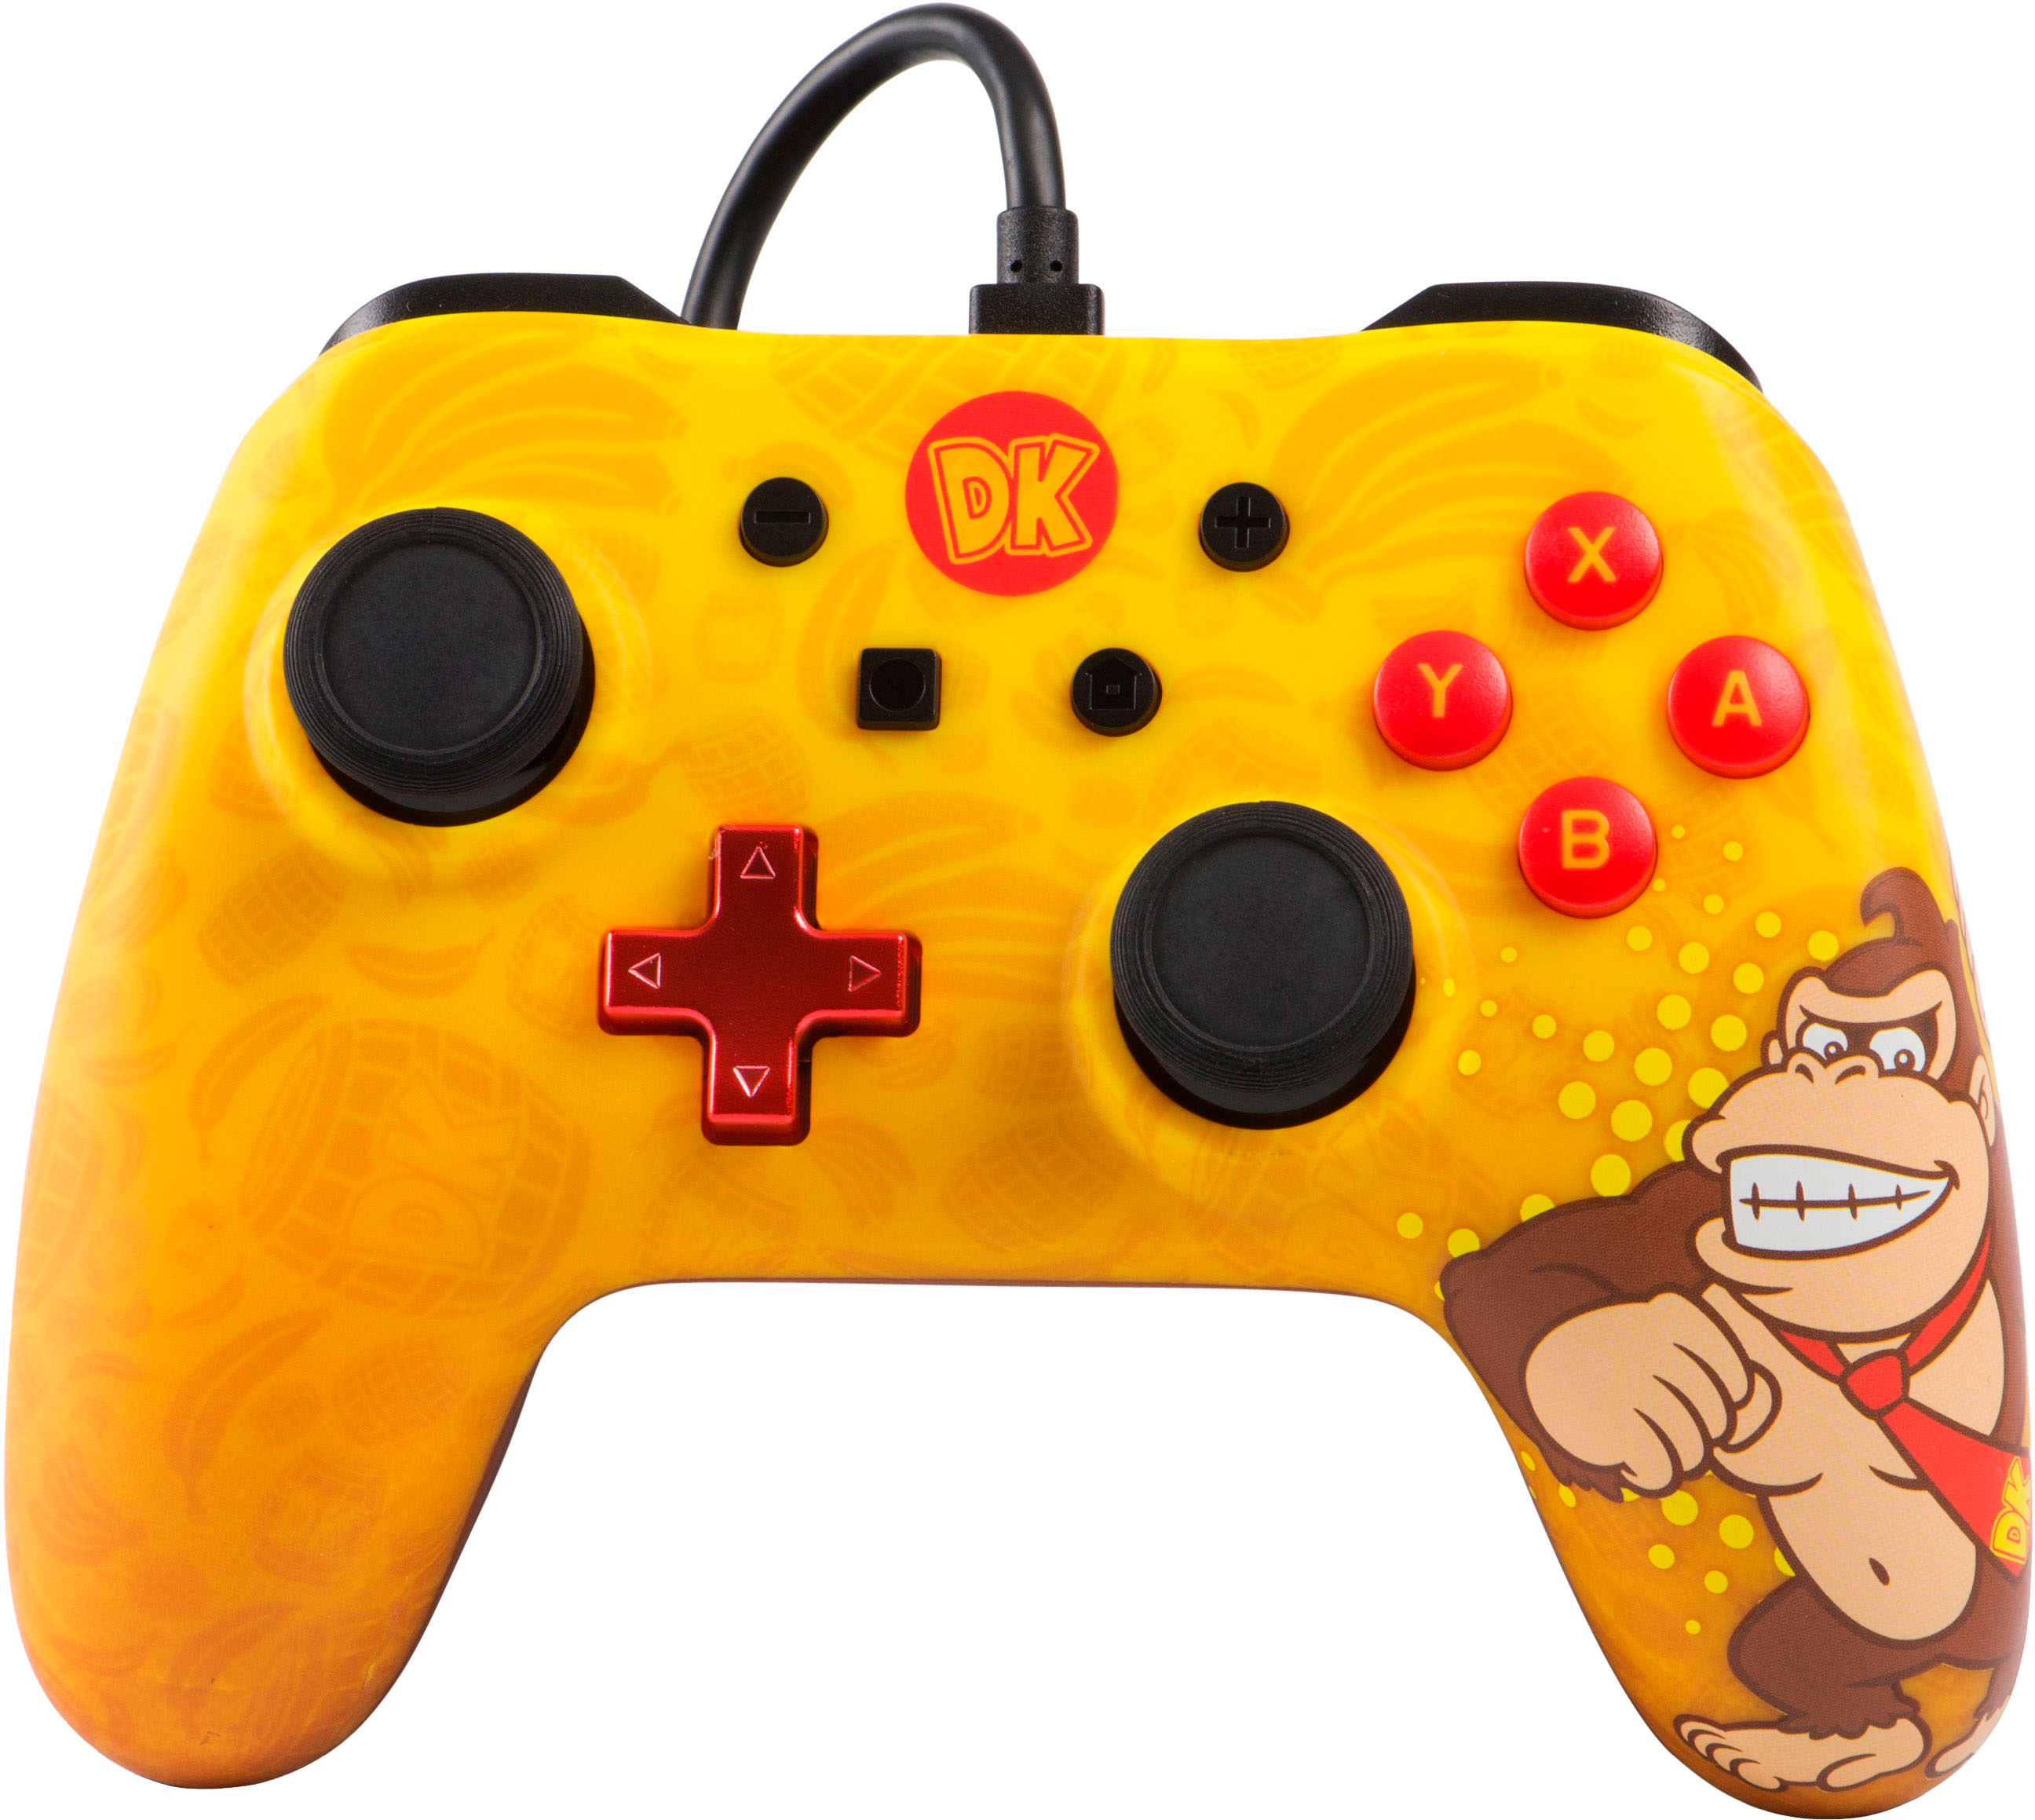 Nintendo Switch Bowser Rock Candy Controller